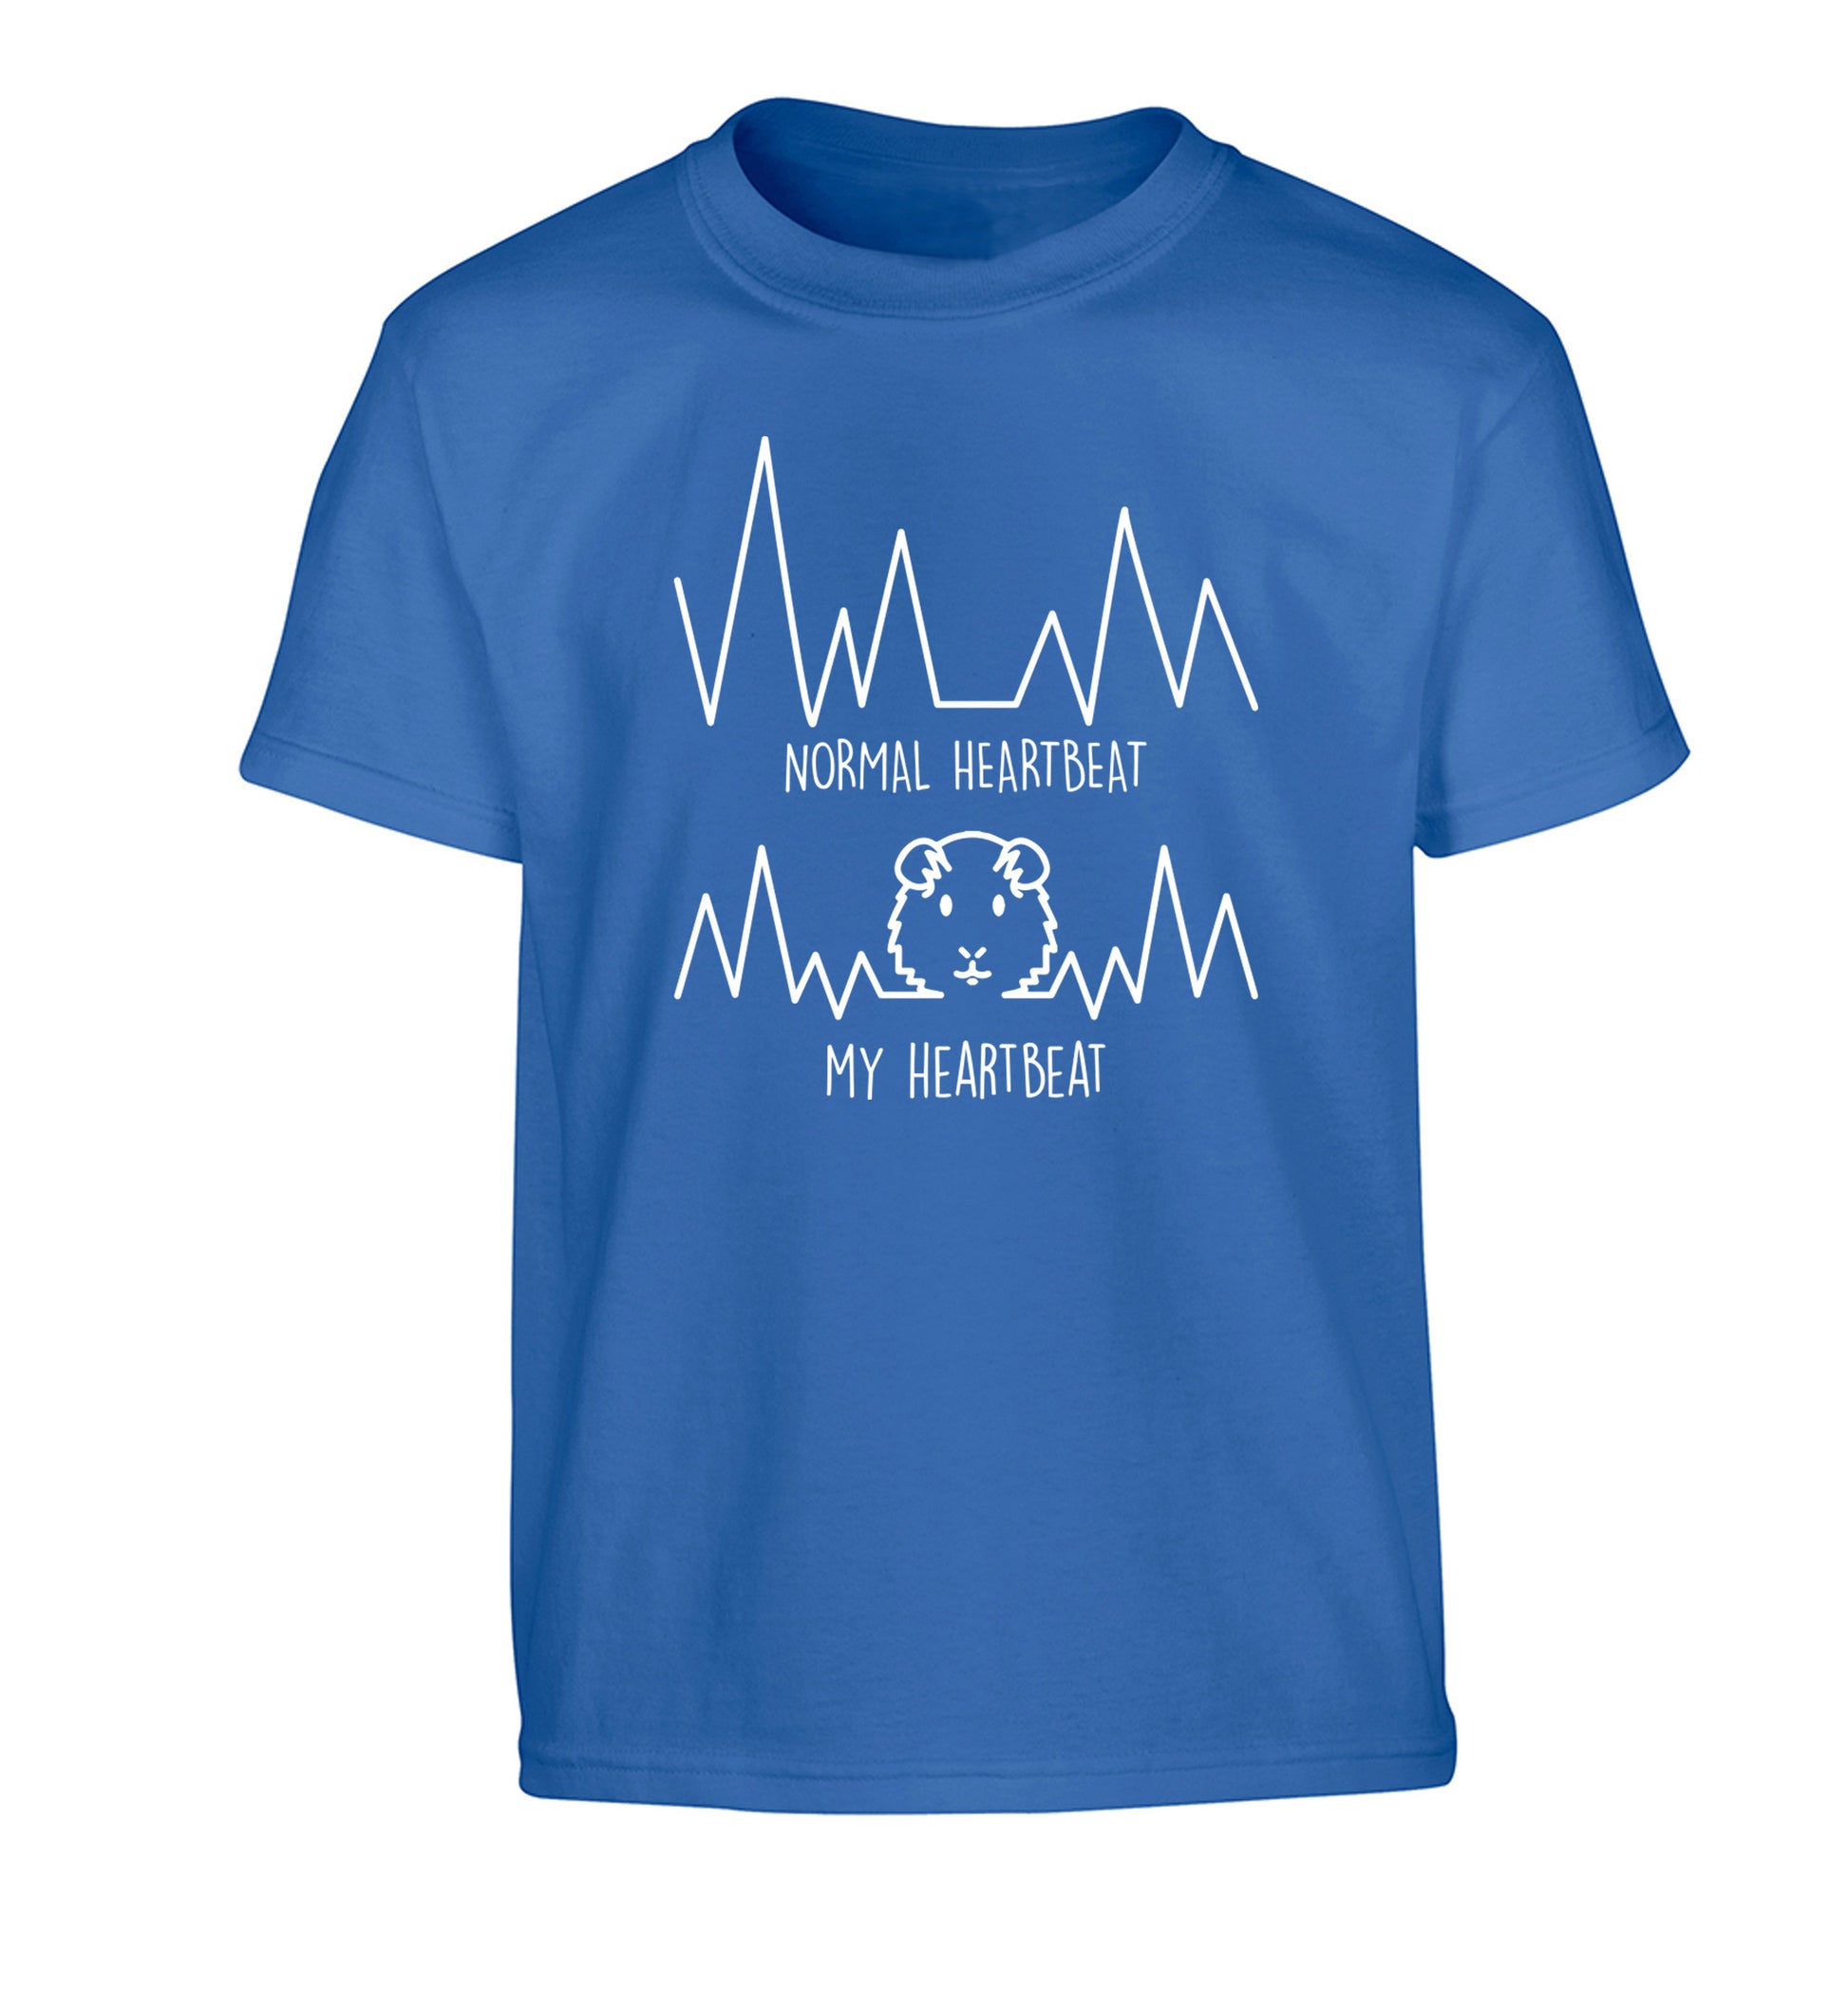 Normal heartbeat vs my heartbeat guinea pig lover Children's blue Tshirt 12-14 Years